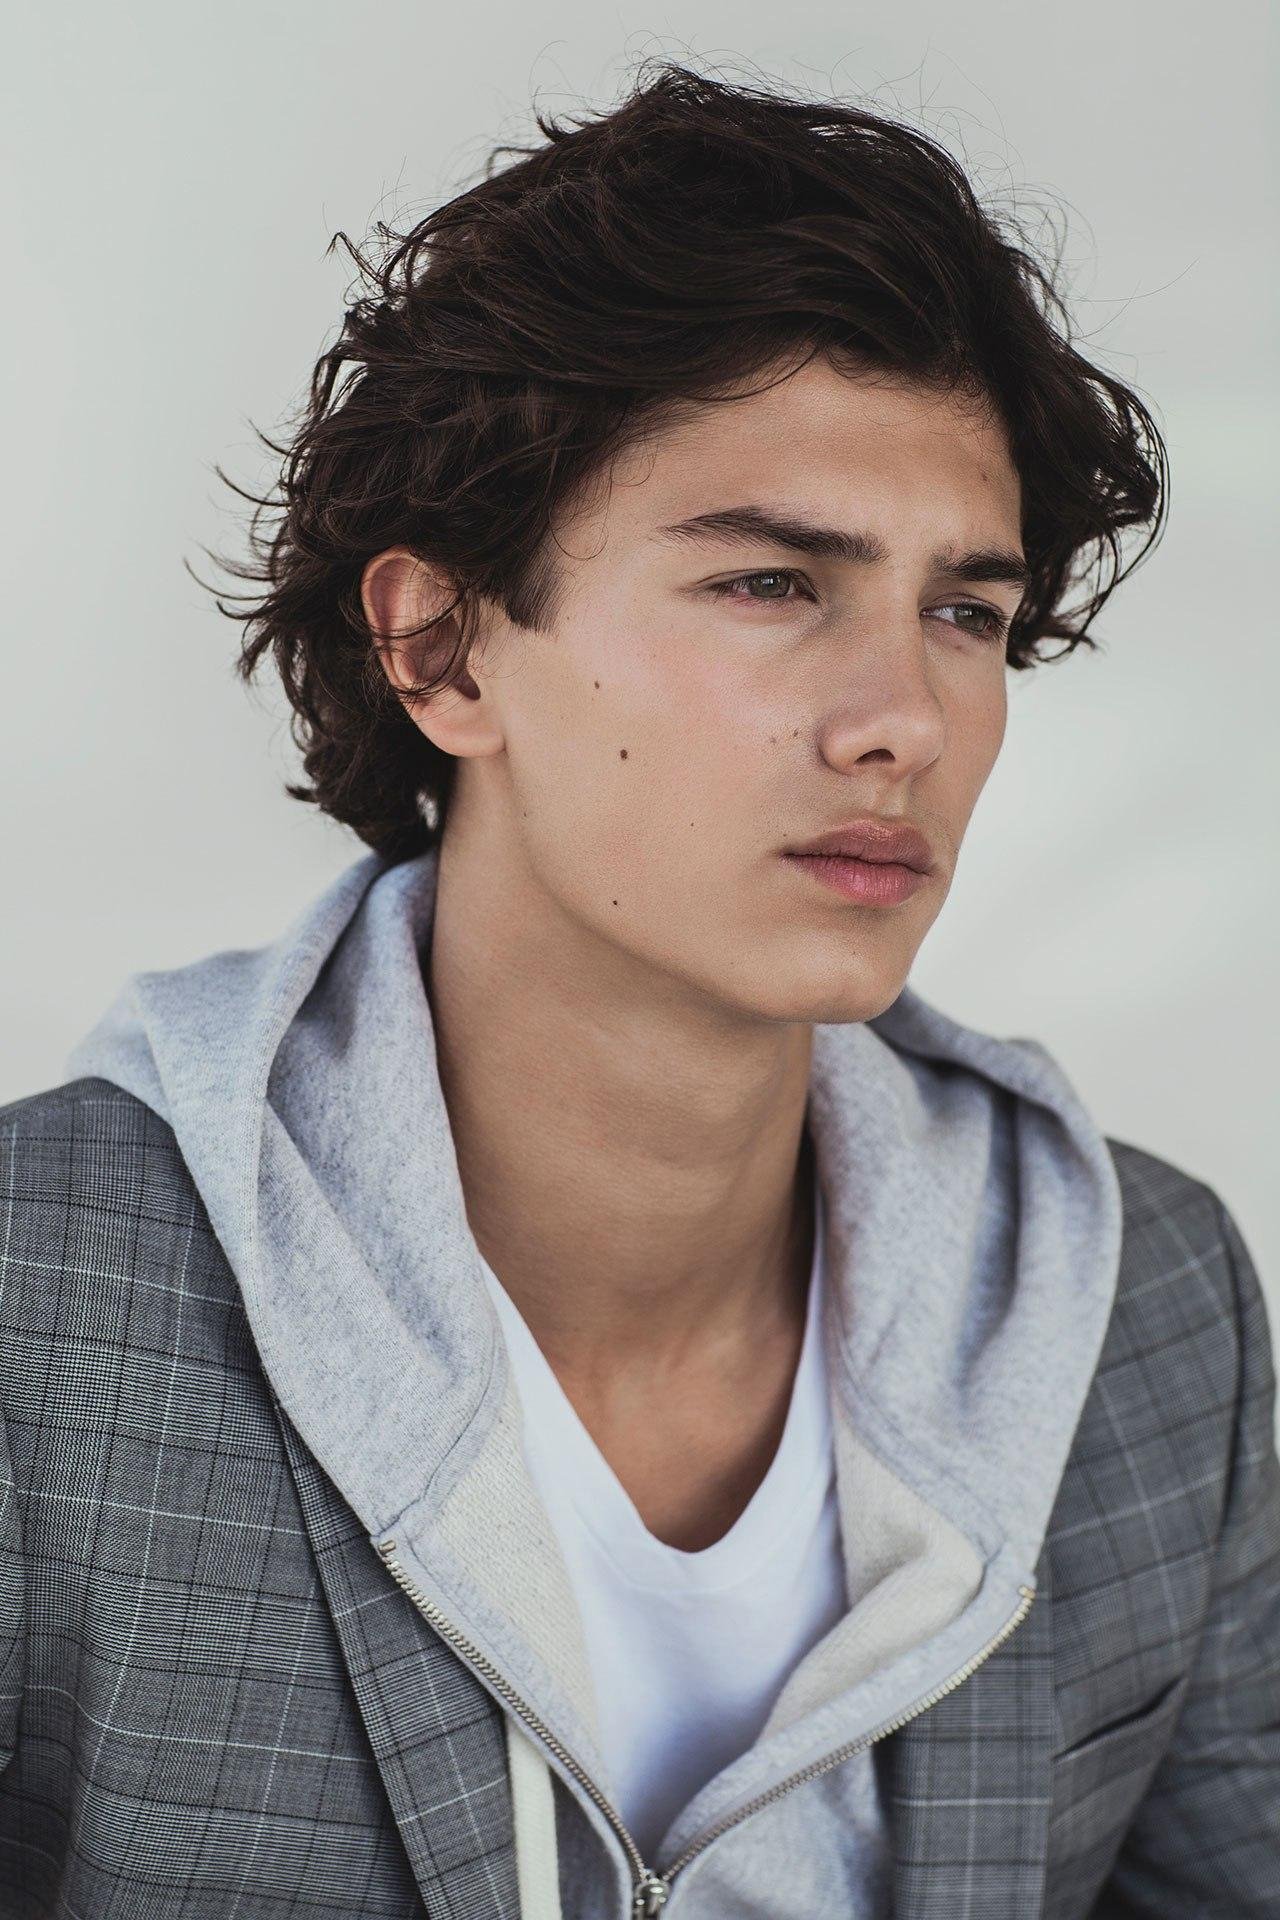 The Internet Is Crushing On 19-Yr-Old Nikolai, Prince Of Denmark Who’s ...